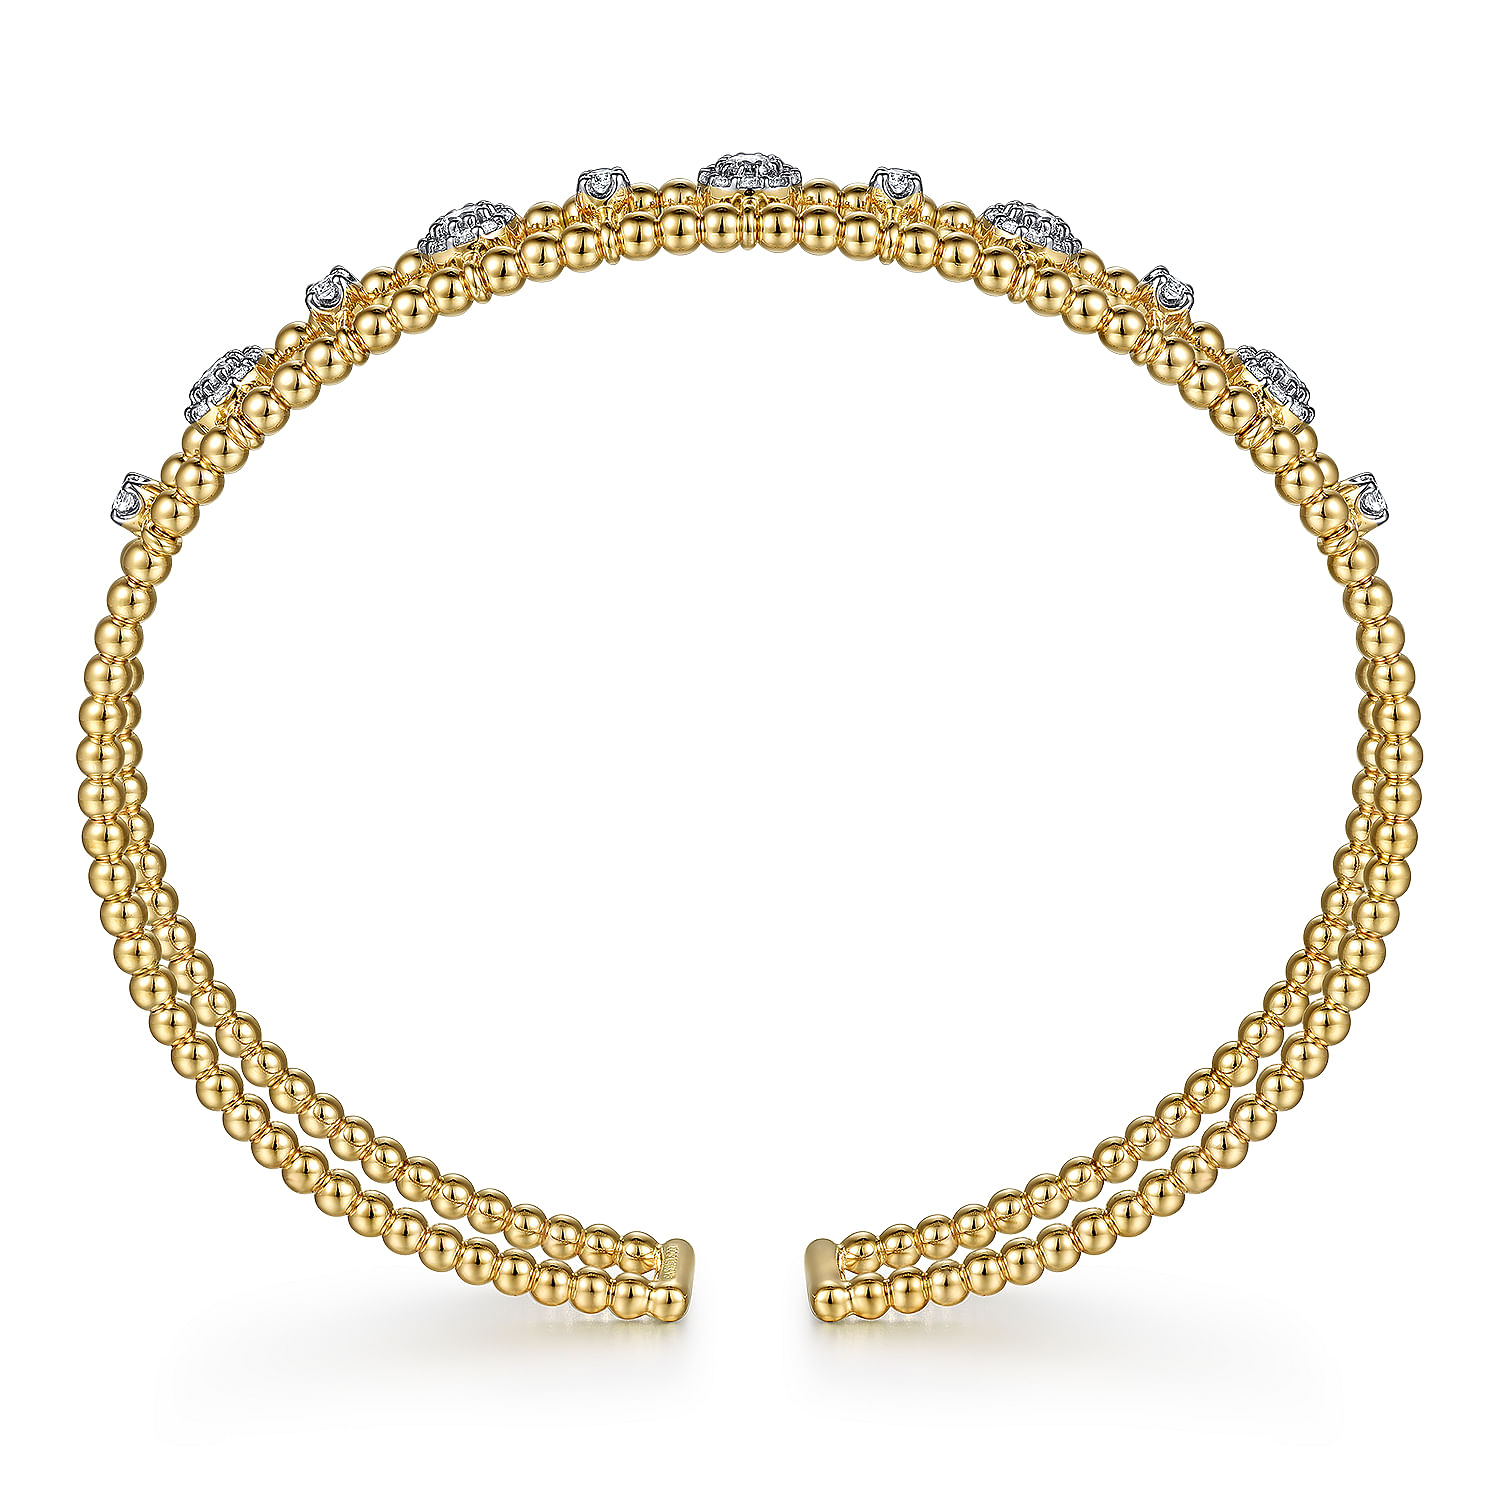 14K Yellow Gold Bujukan Bead Cuff Bracelet with Diamond Cluster and Bezel Connectors